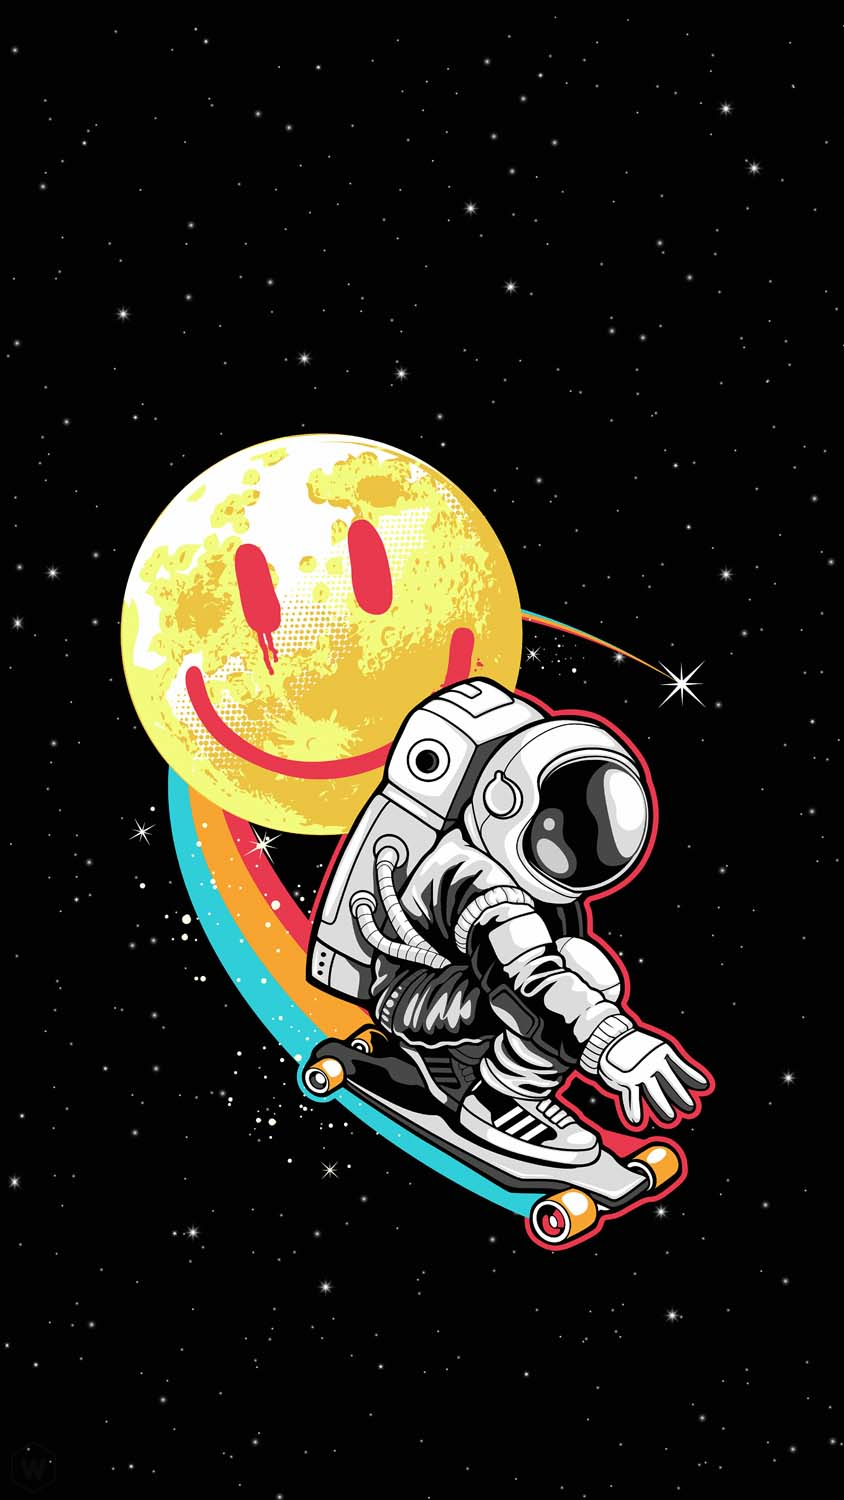 Astronaut Surfing IPhone Wallpaper HD  IPhone Wallpapers